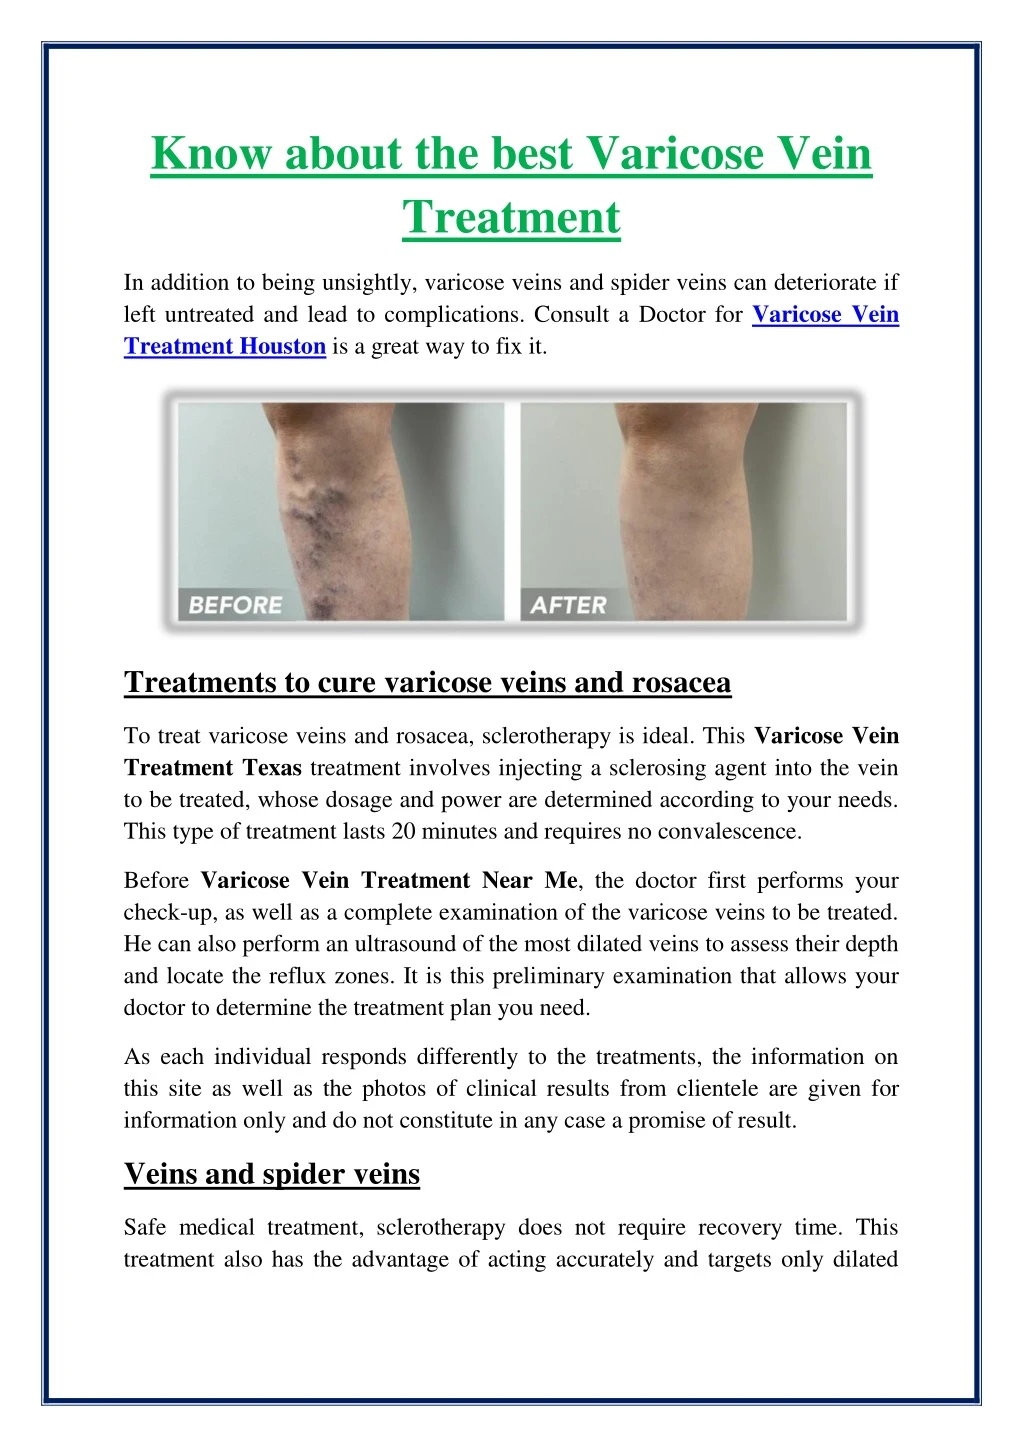 know about the best varicose vein treatment n.